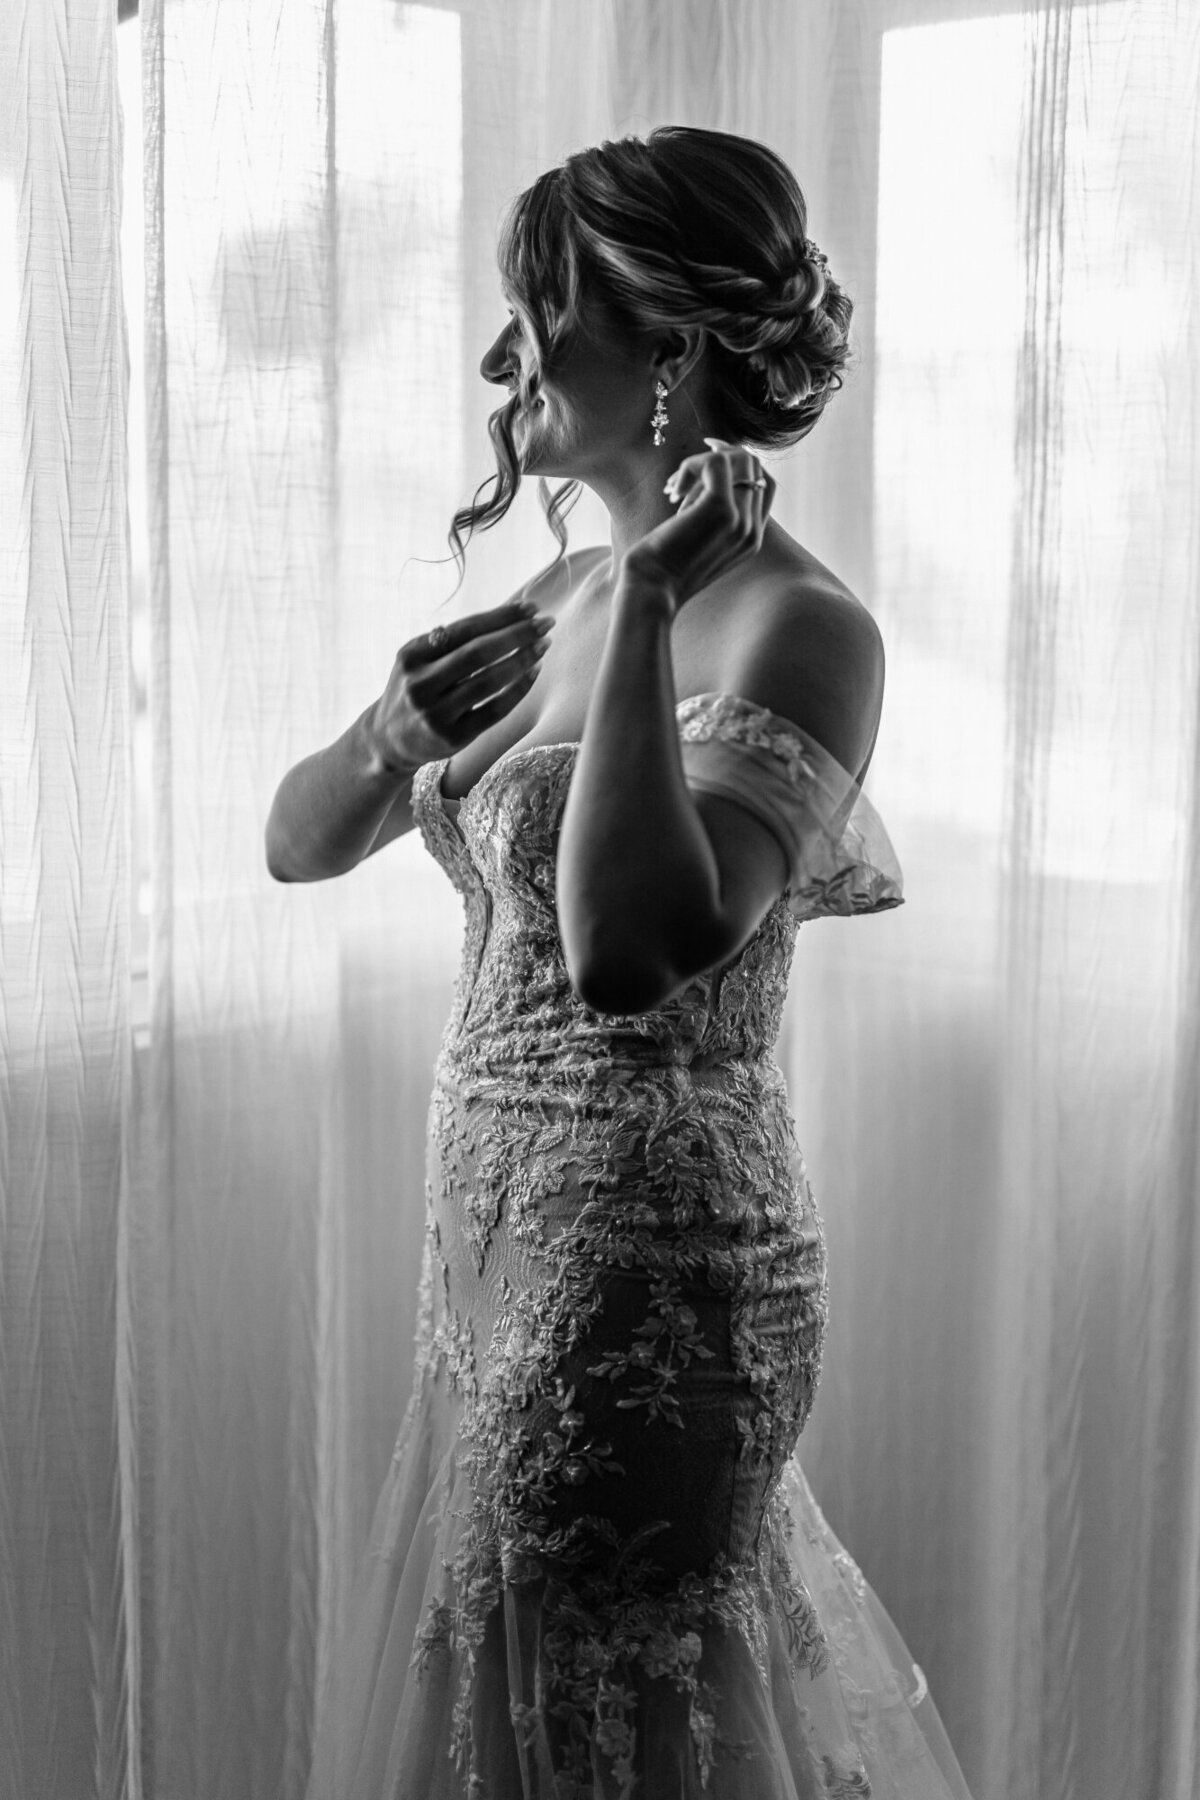 Bride adjusting her hair while getting ready to walk down the isle.